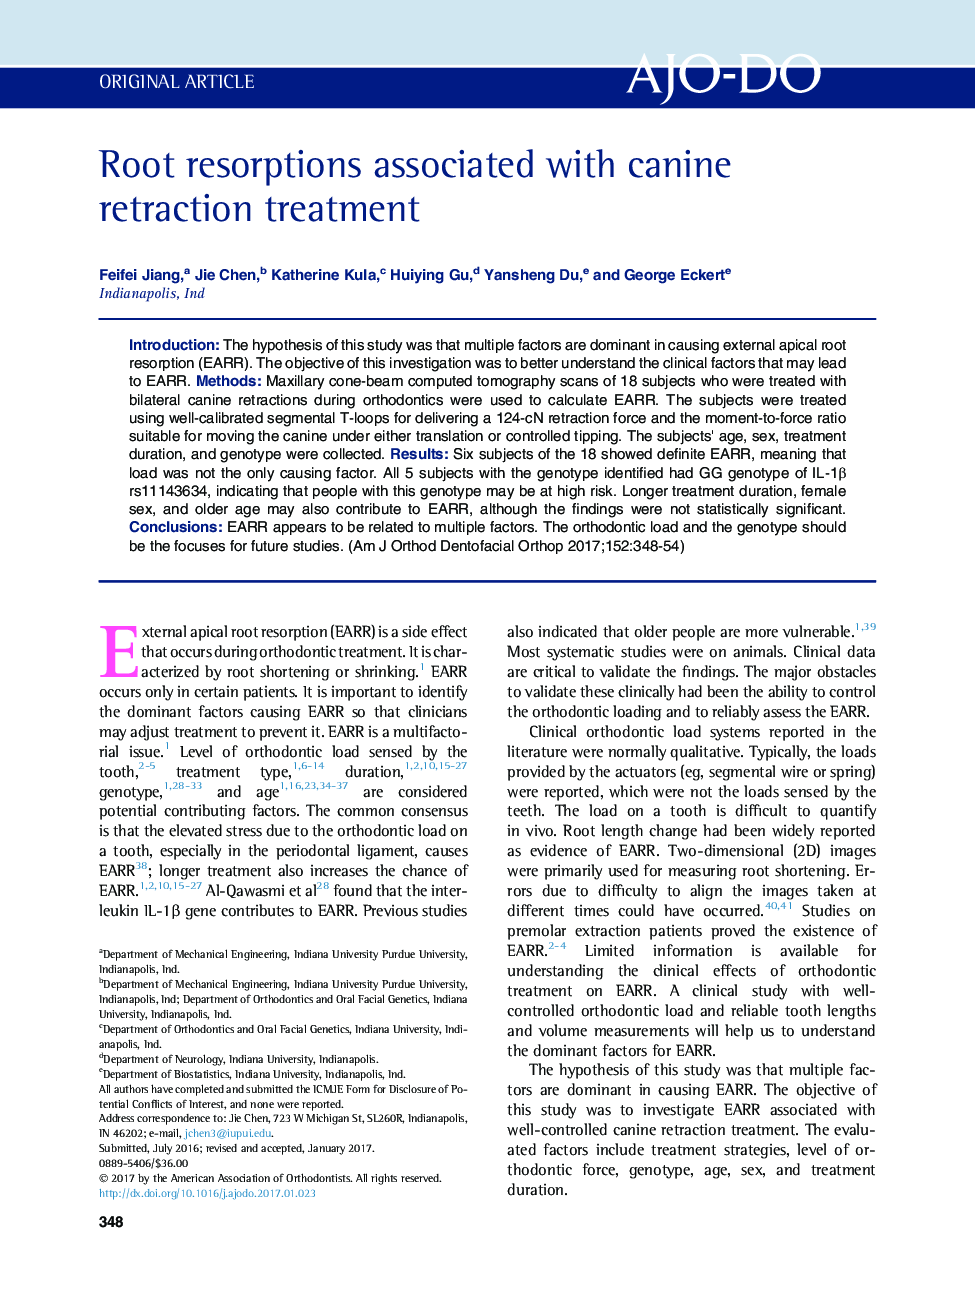 Root resorptions associated with canine retraction treatment